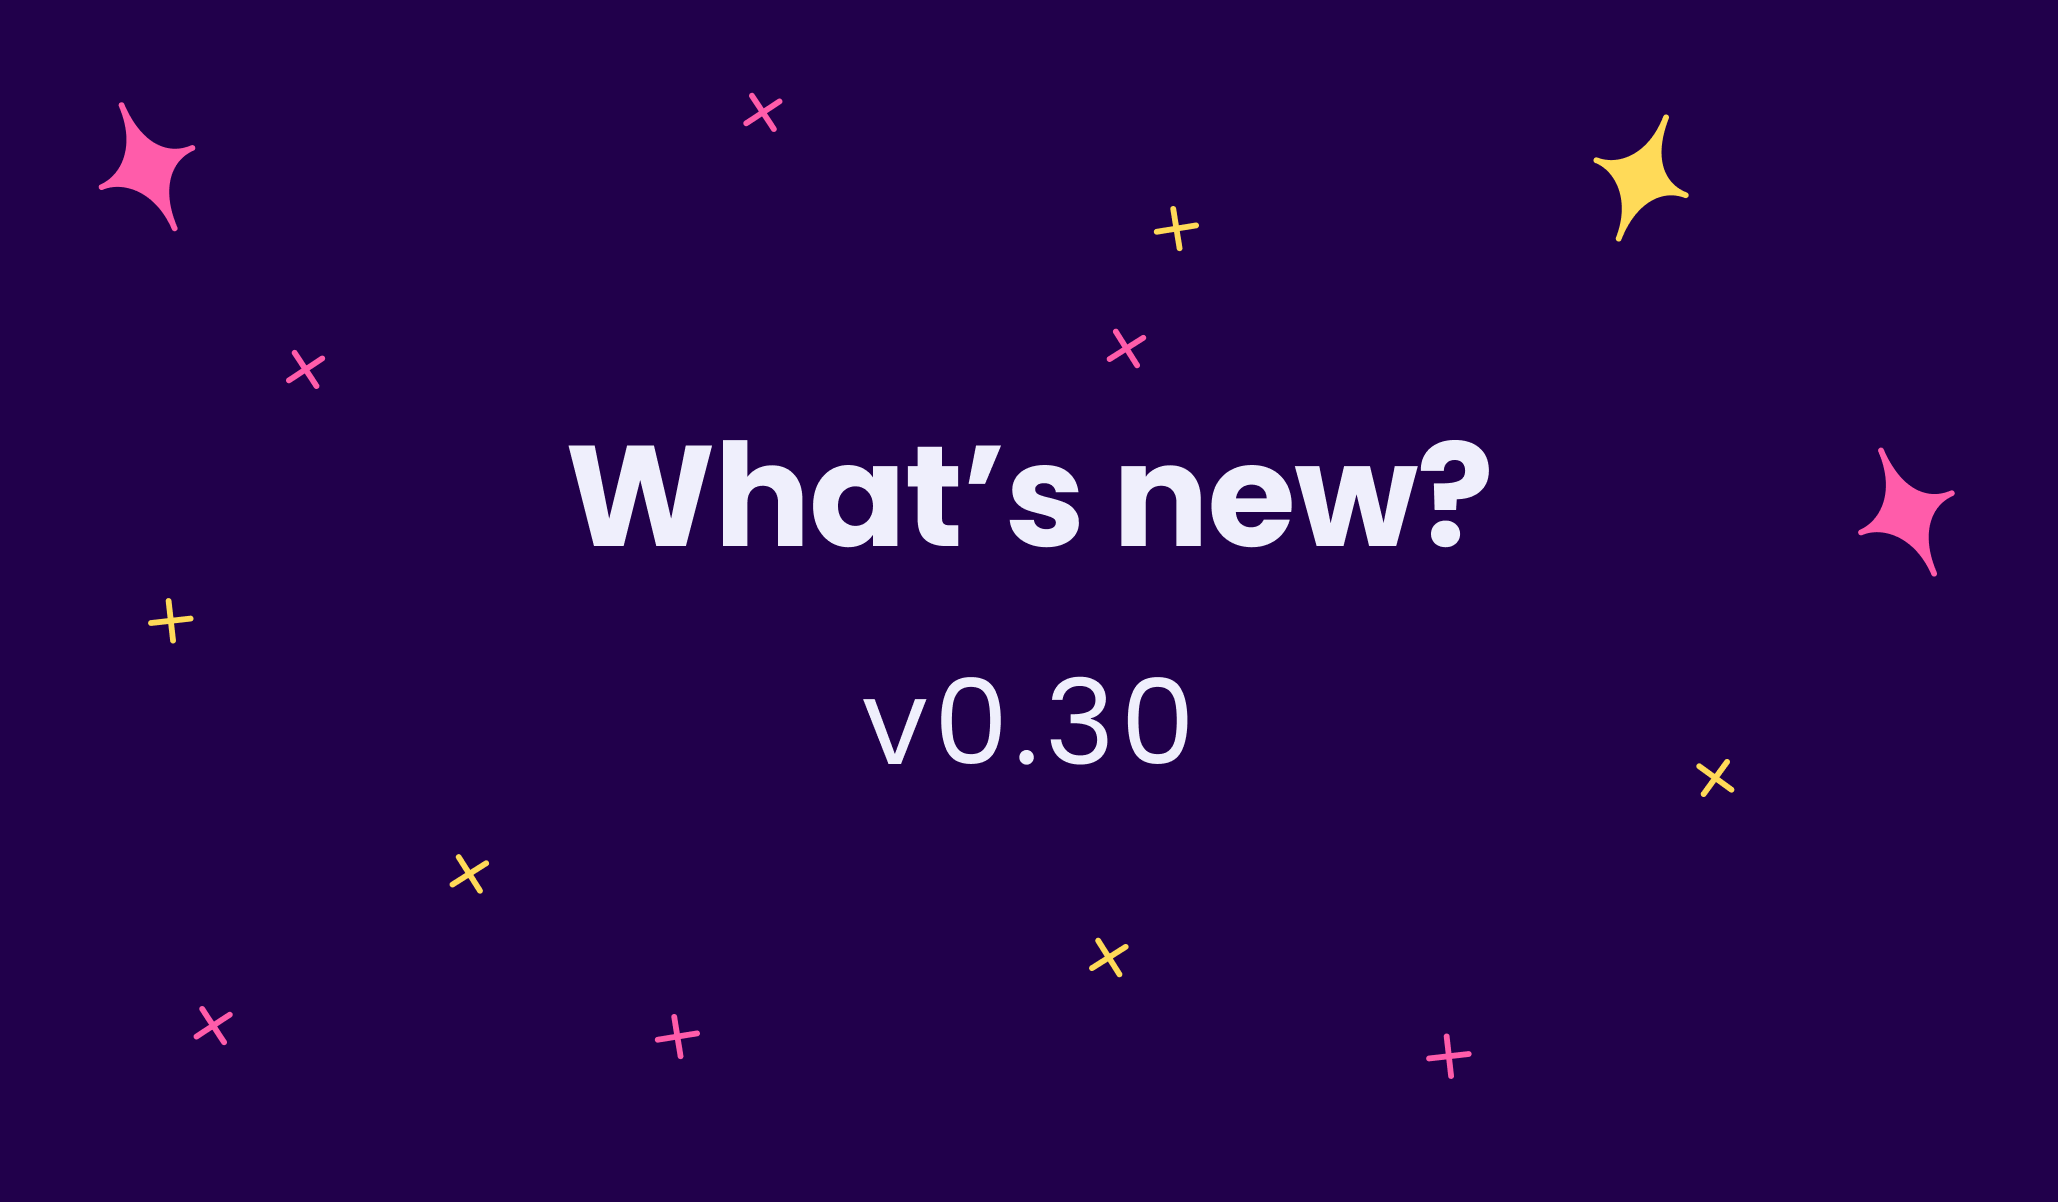 What's new in v0.30